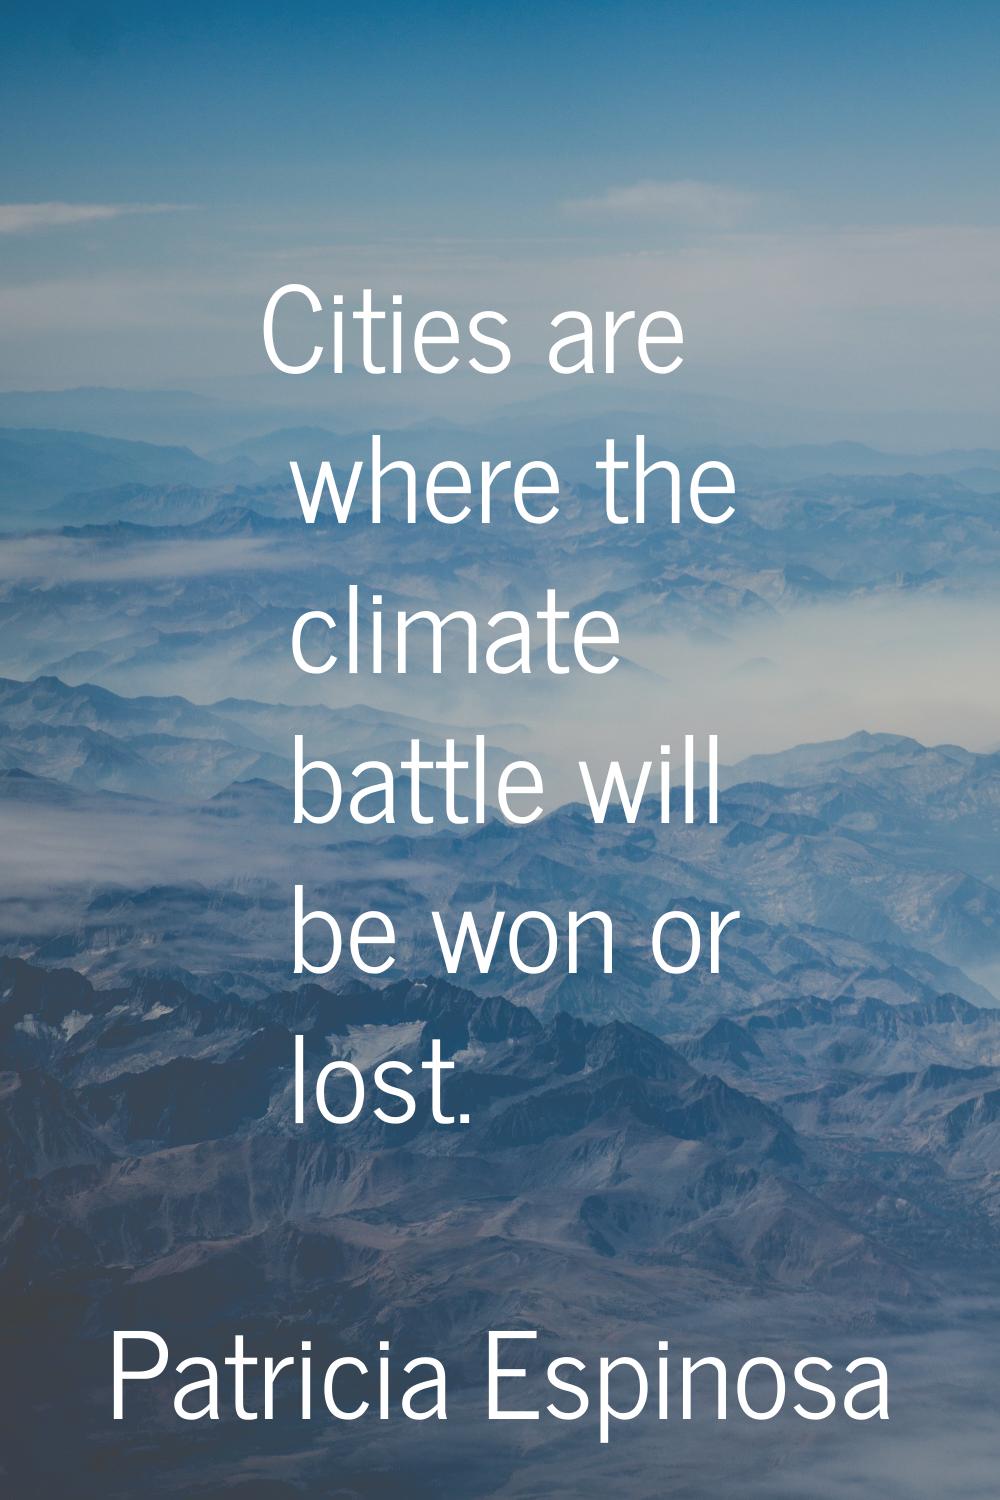 Cities are where the climate battle will be won or lost.